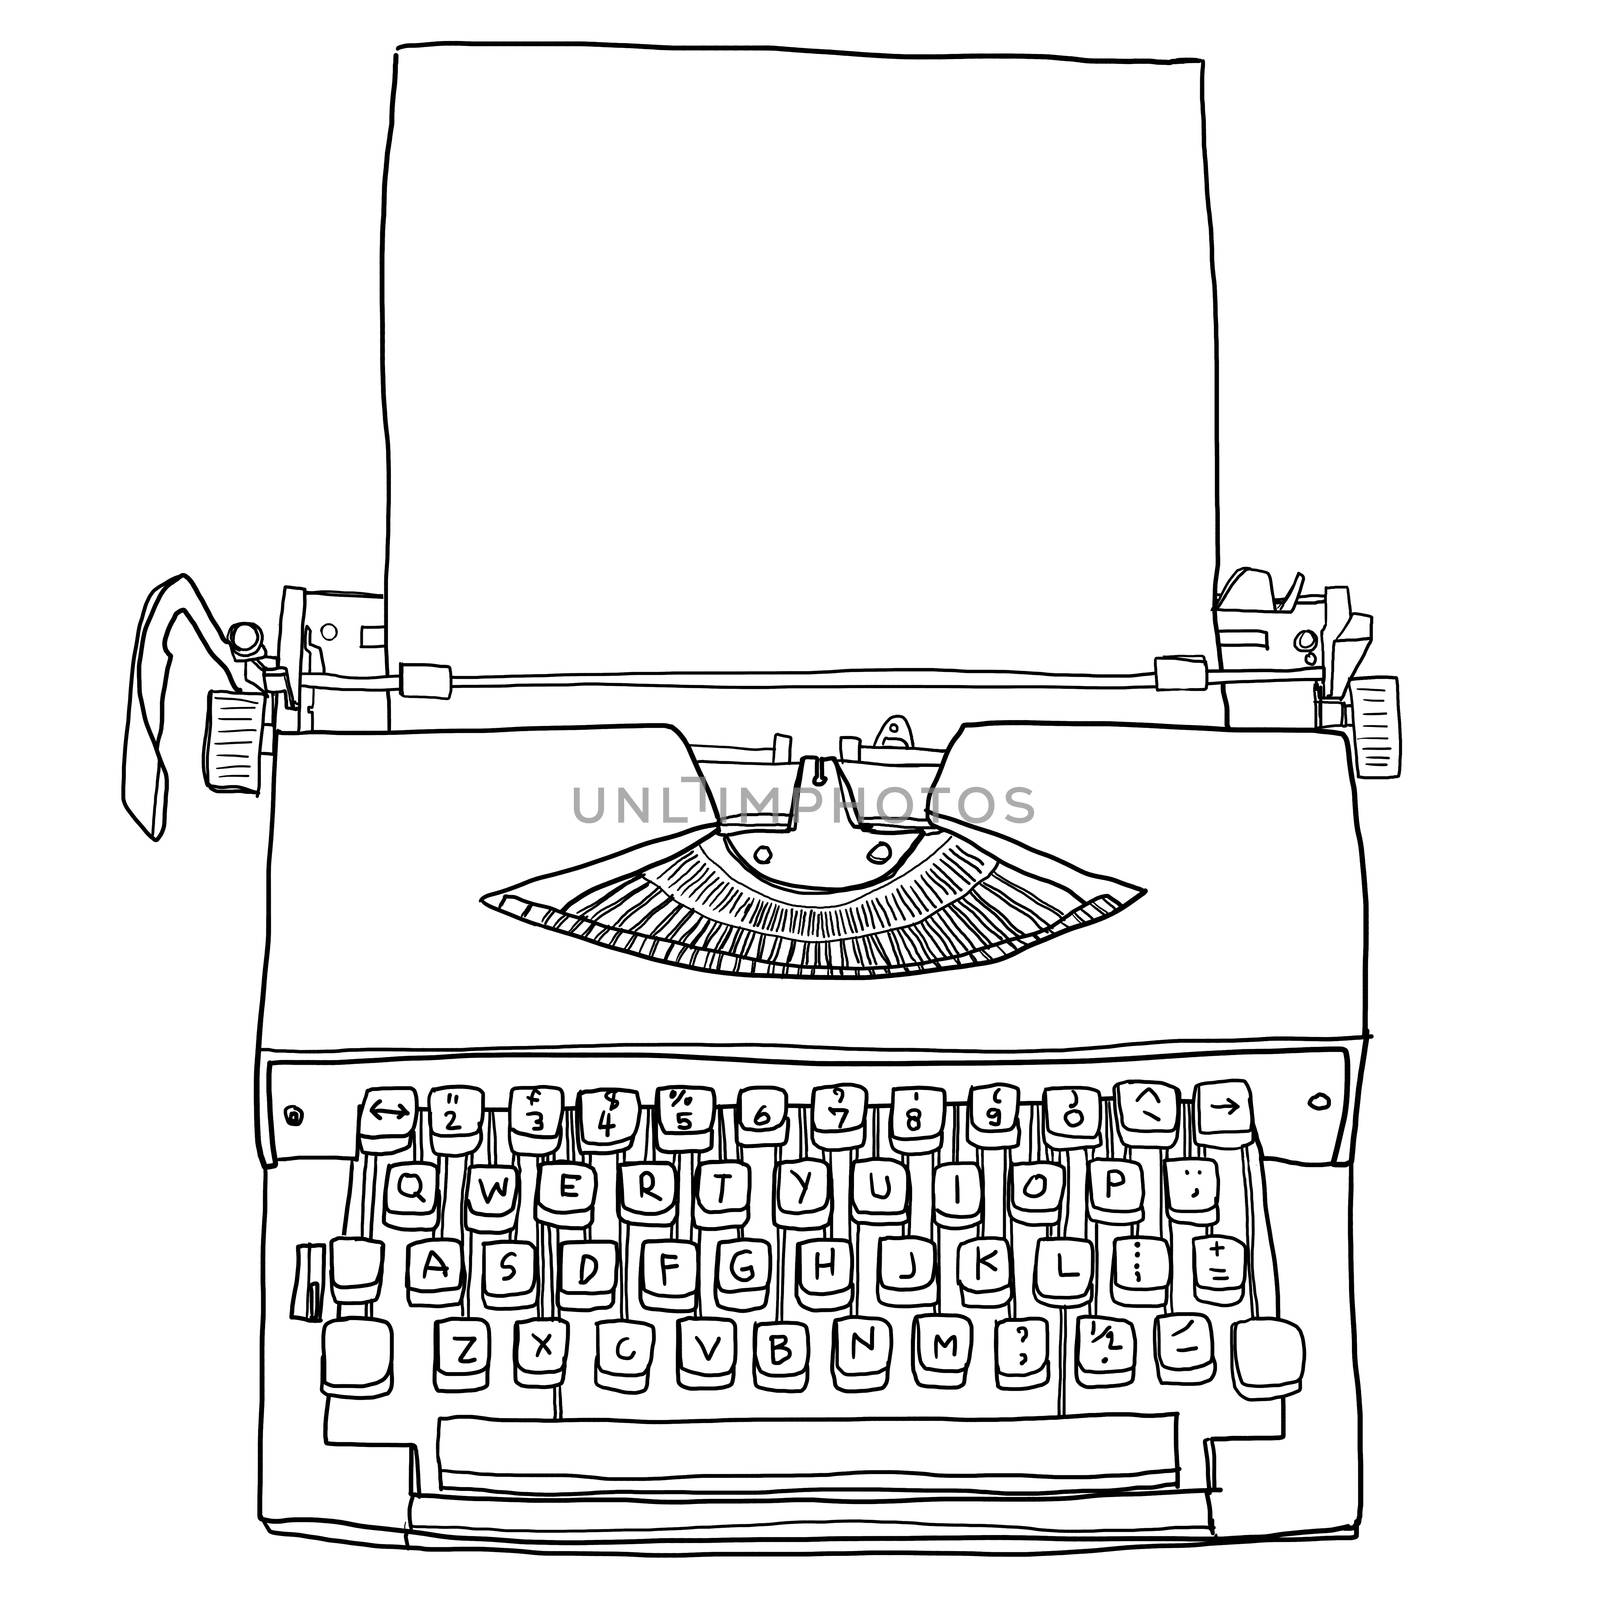  vintageTypewriters With blank paper cute line art painting illustration